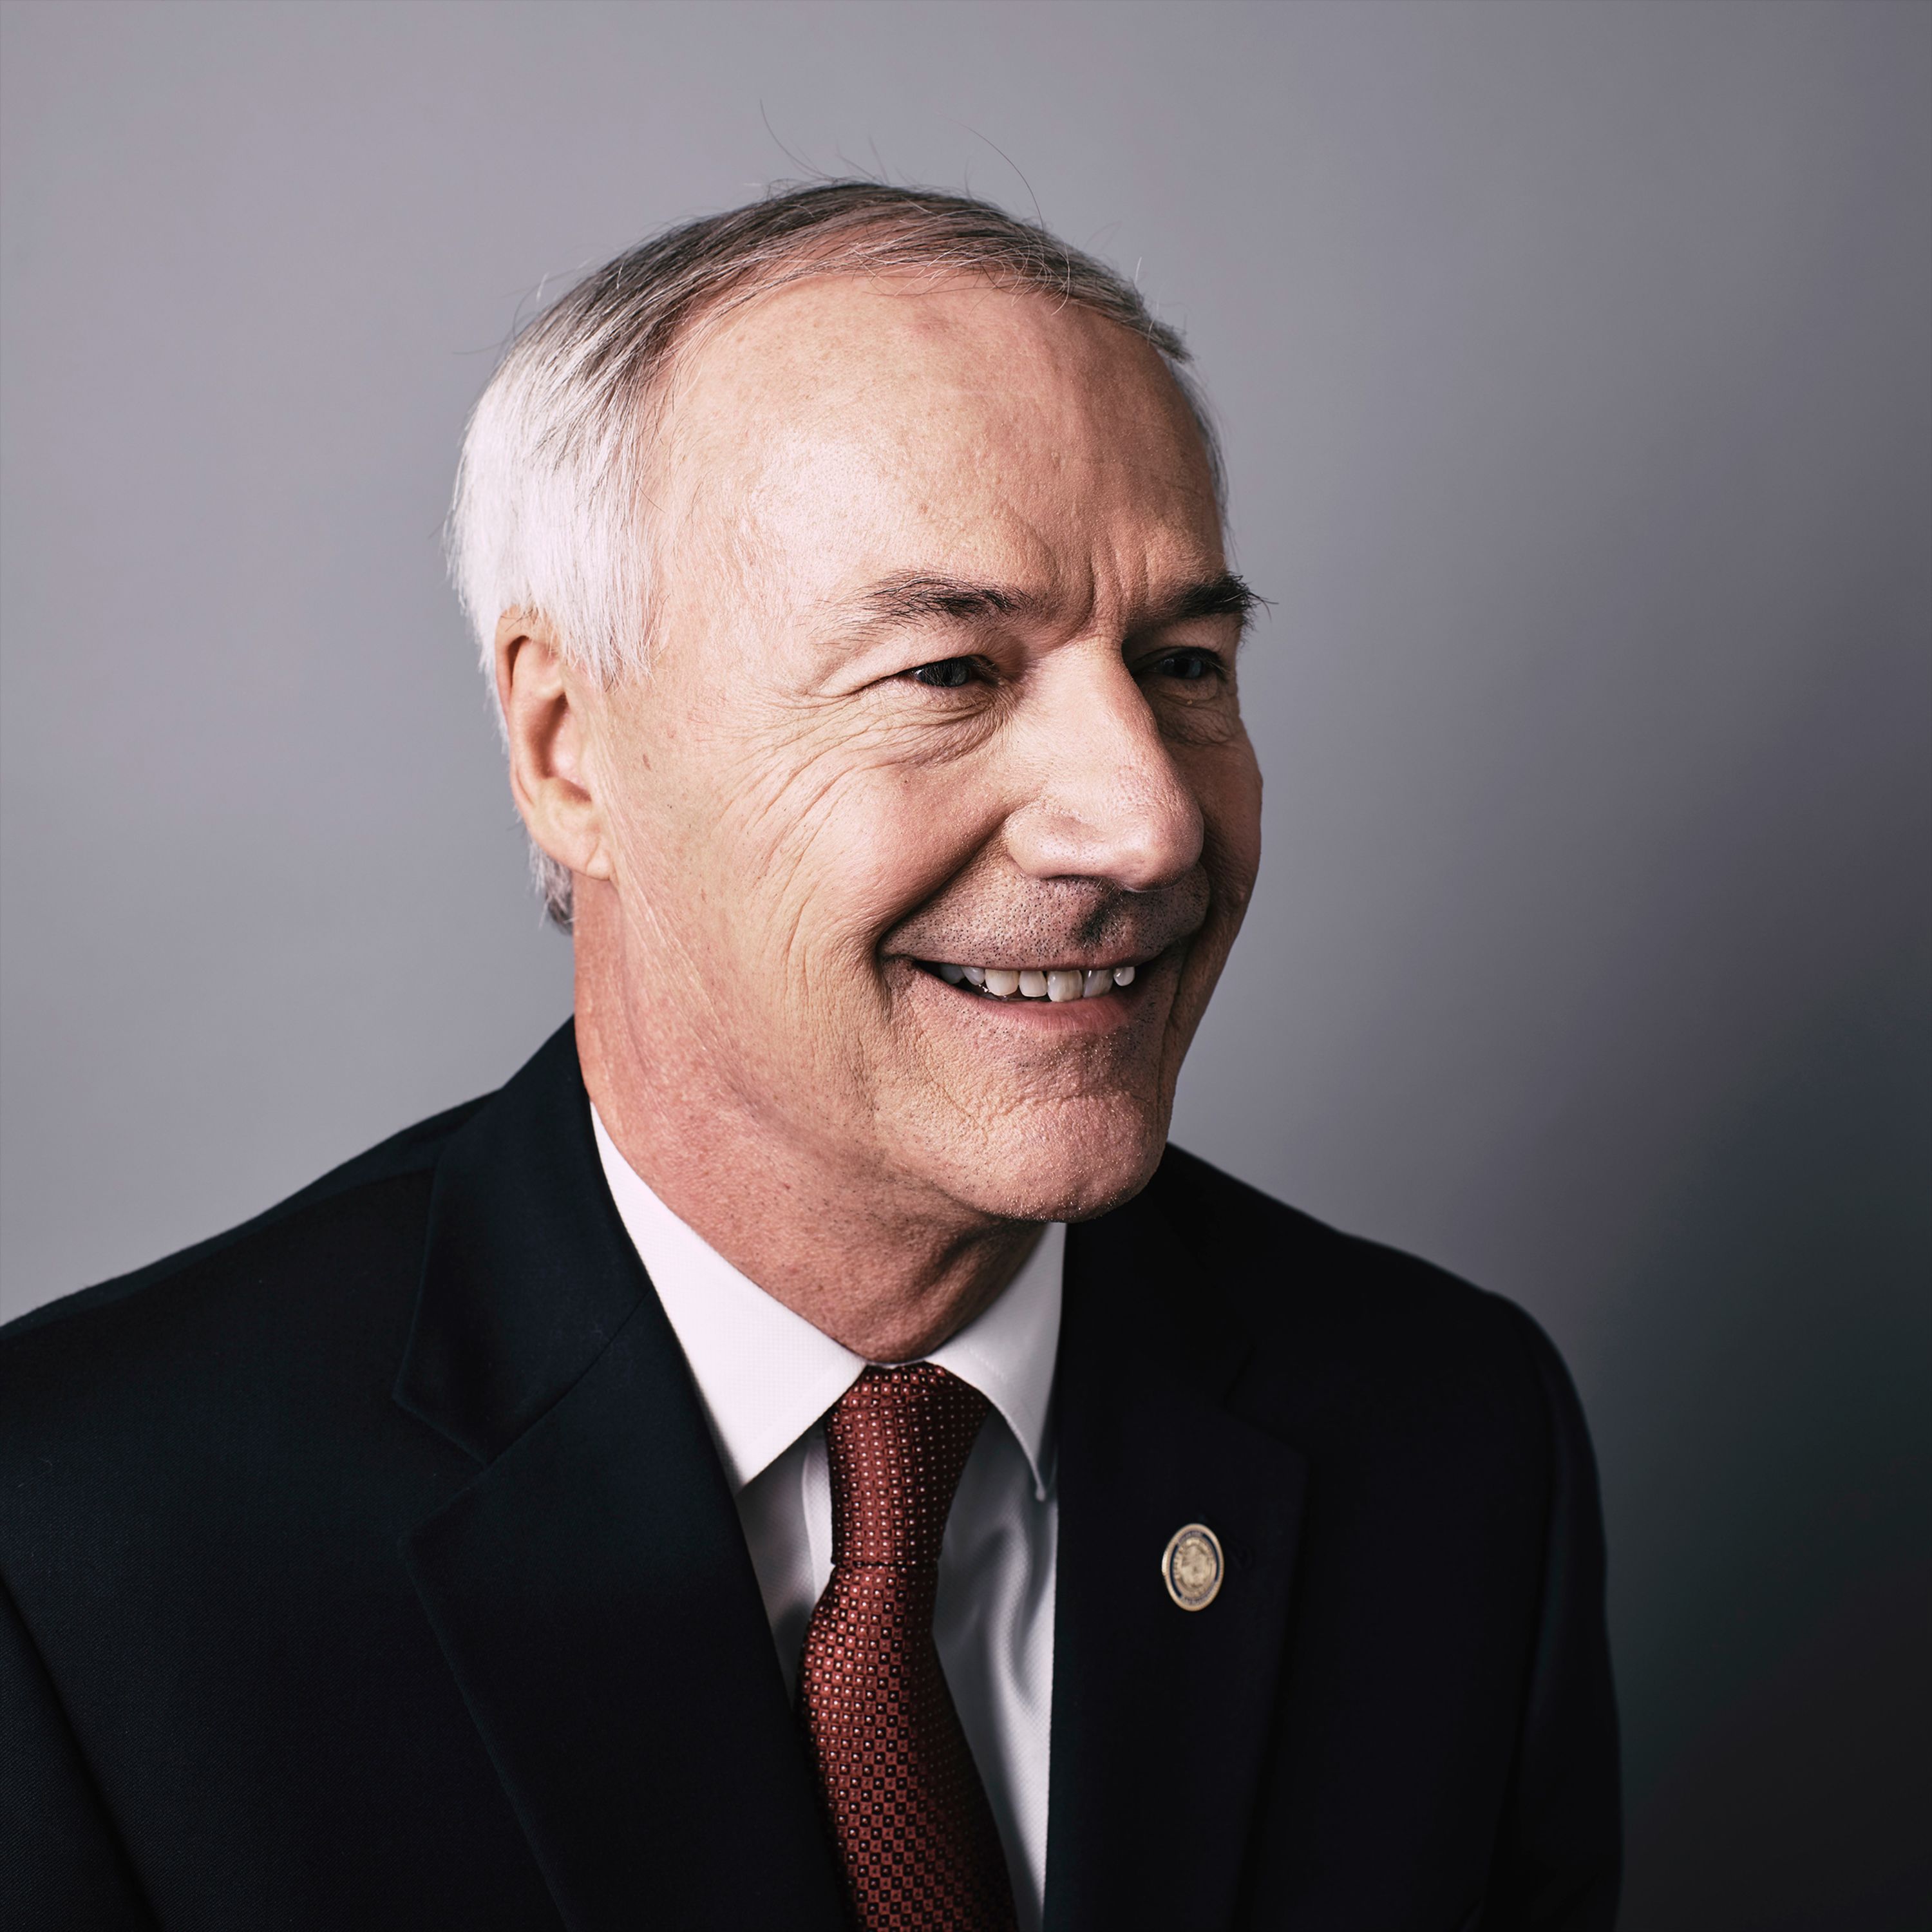 Asa Hutchinson poses for a portrait at the Republican National Convention in 2016.